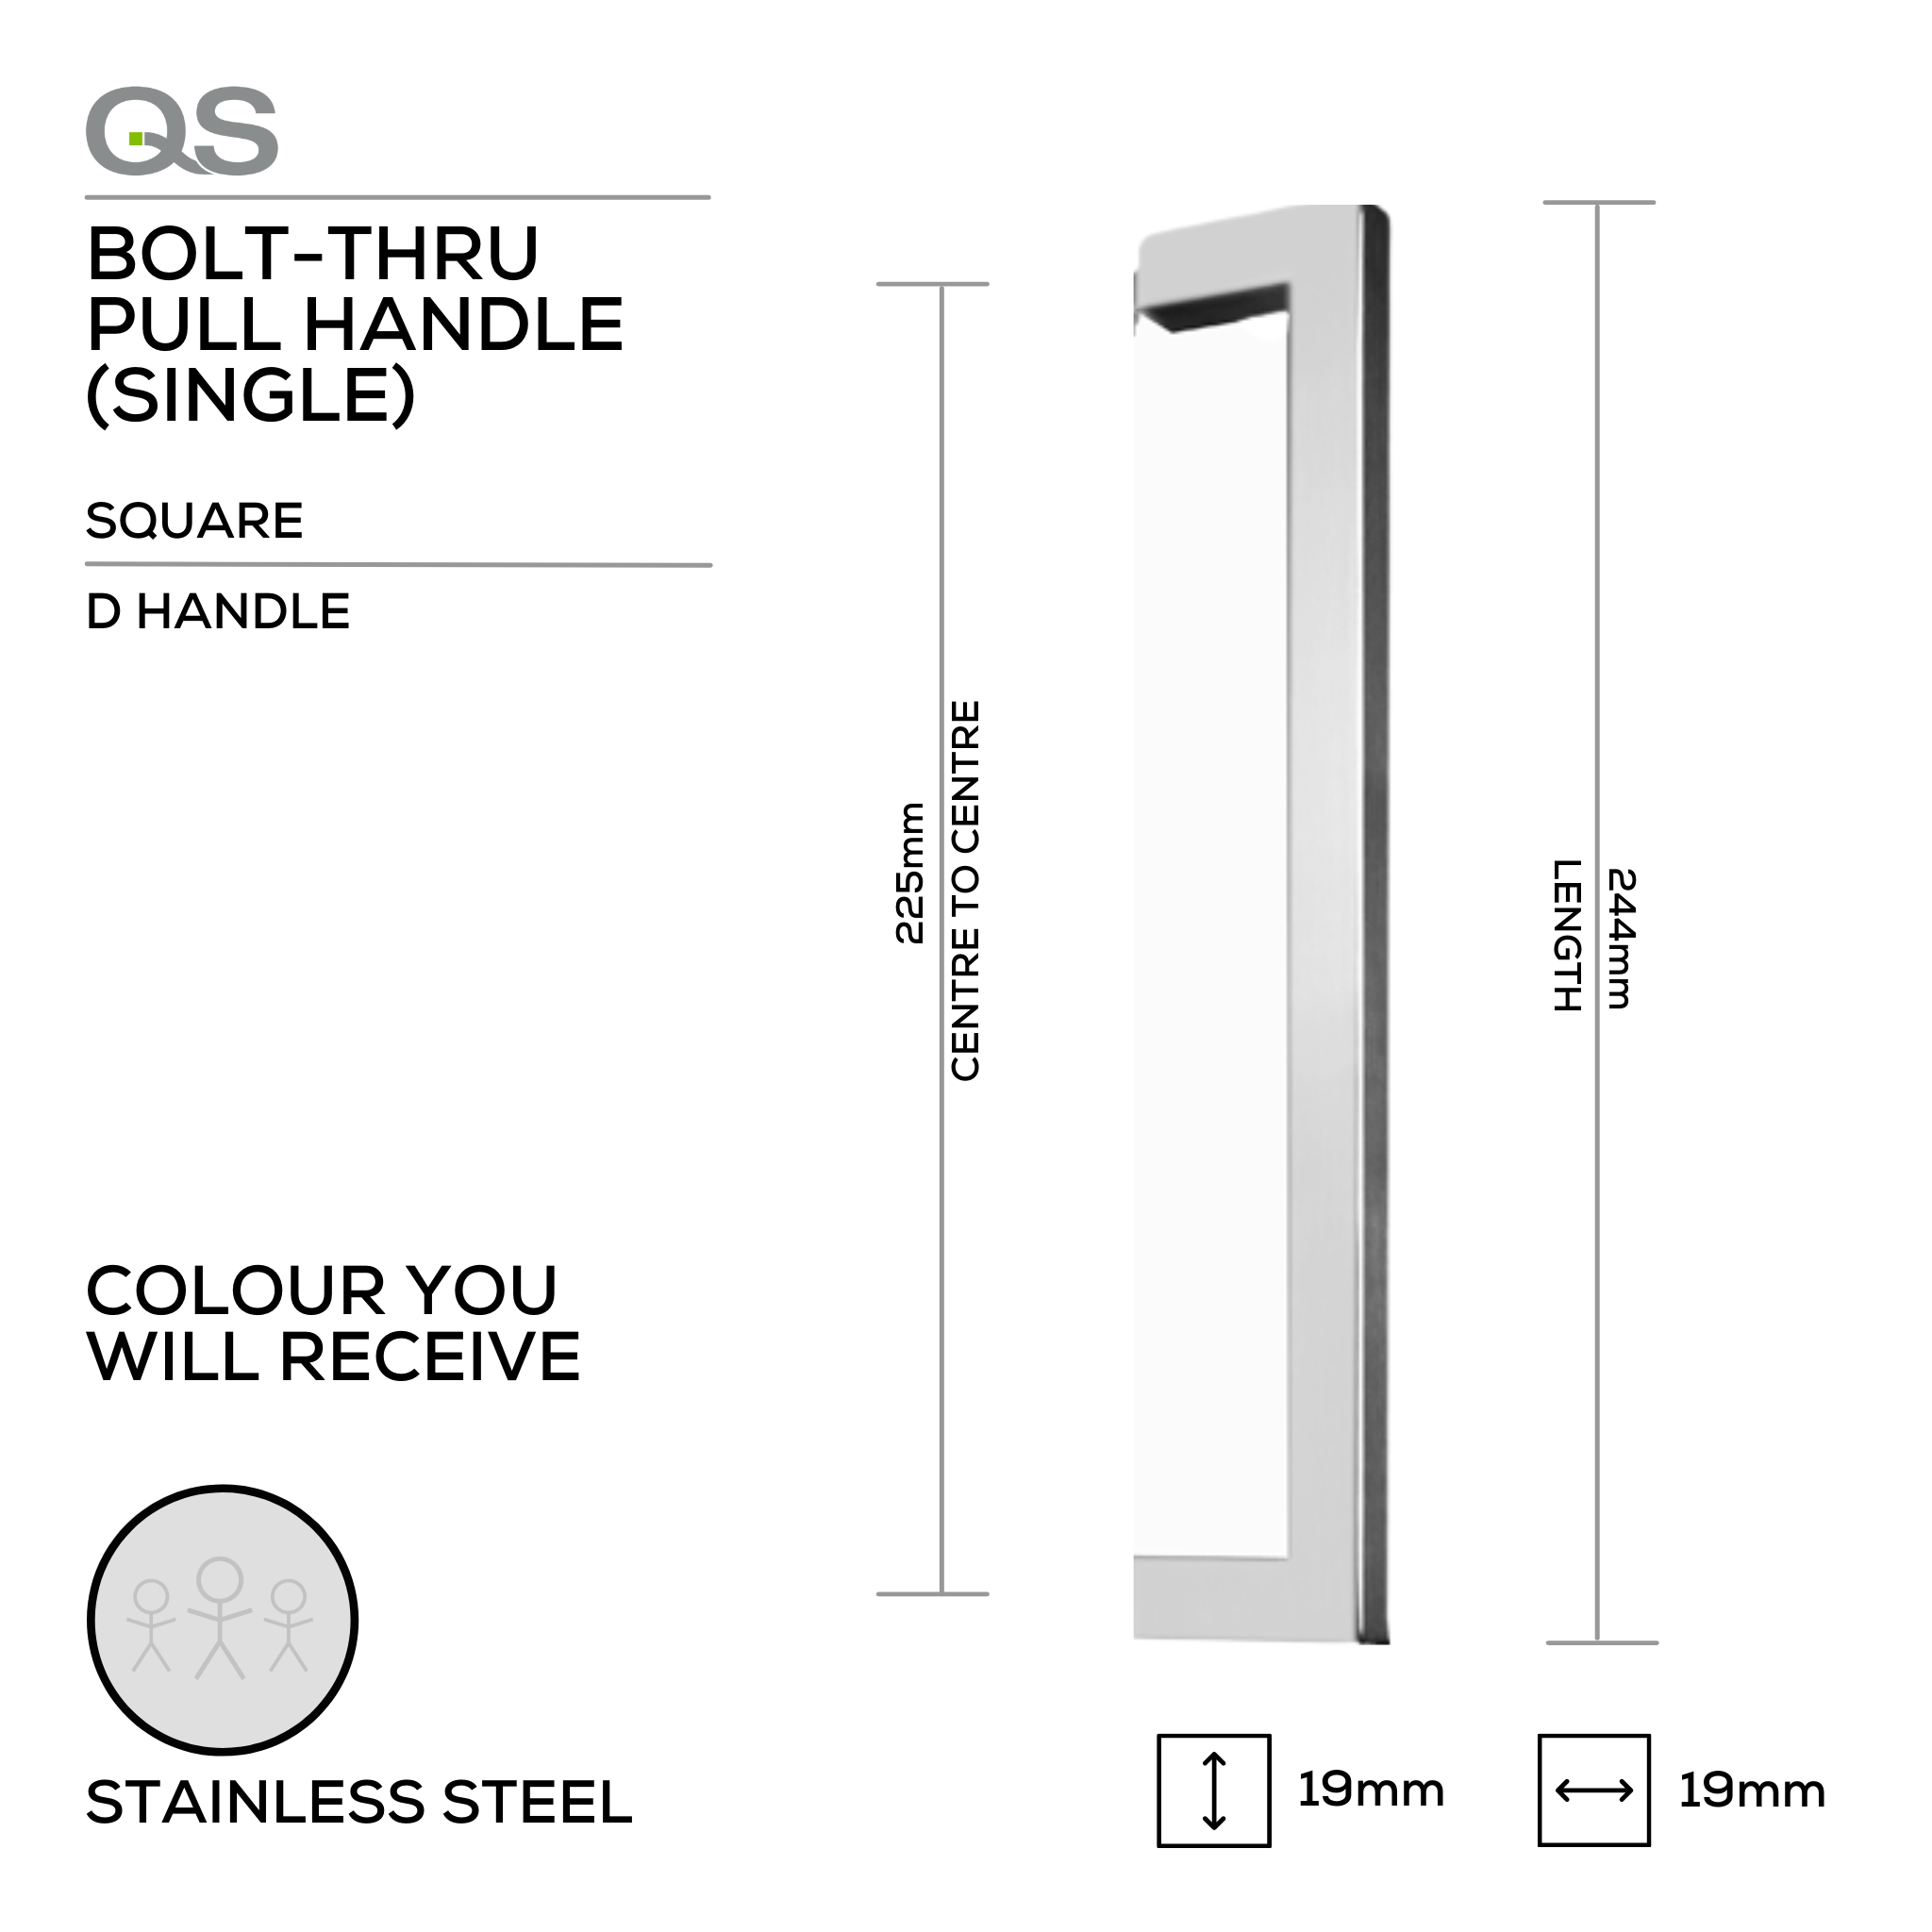 QS2621/1 SQ SECT, Pull Handle, Square, D Handle, BoltThru, 19mm (d) x 244mm (l) x 225mm (ctc), Stainless Steel, QS